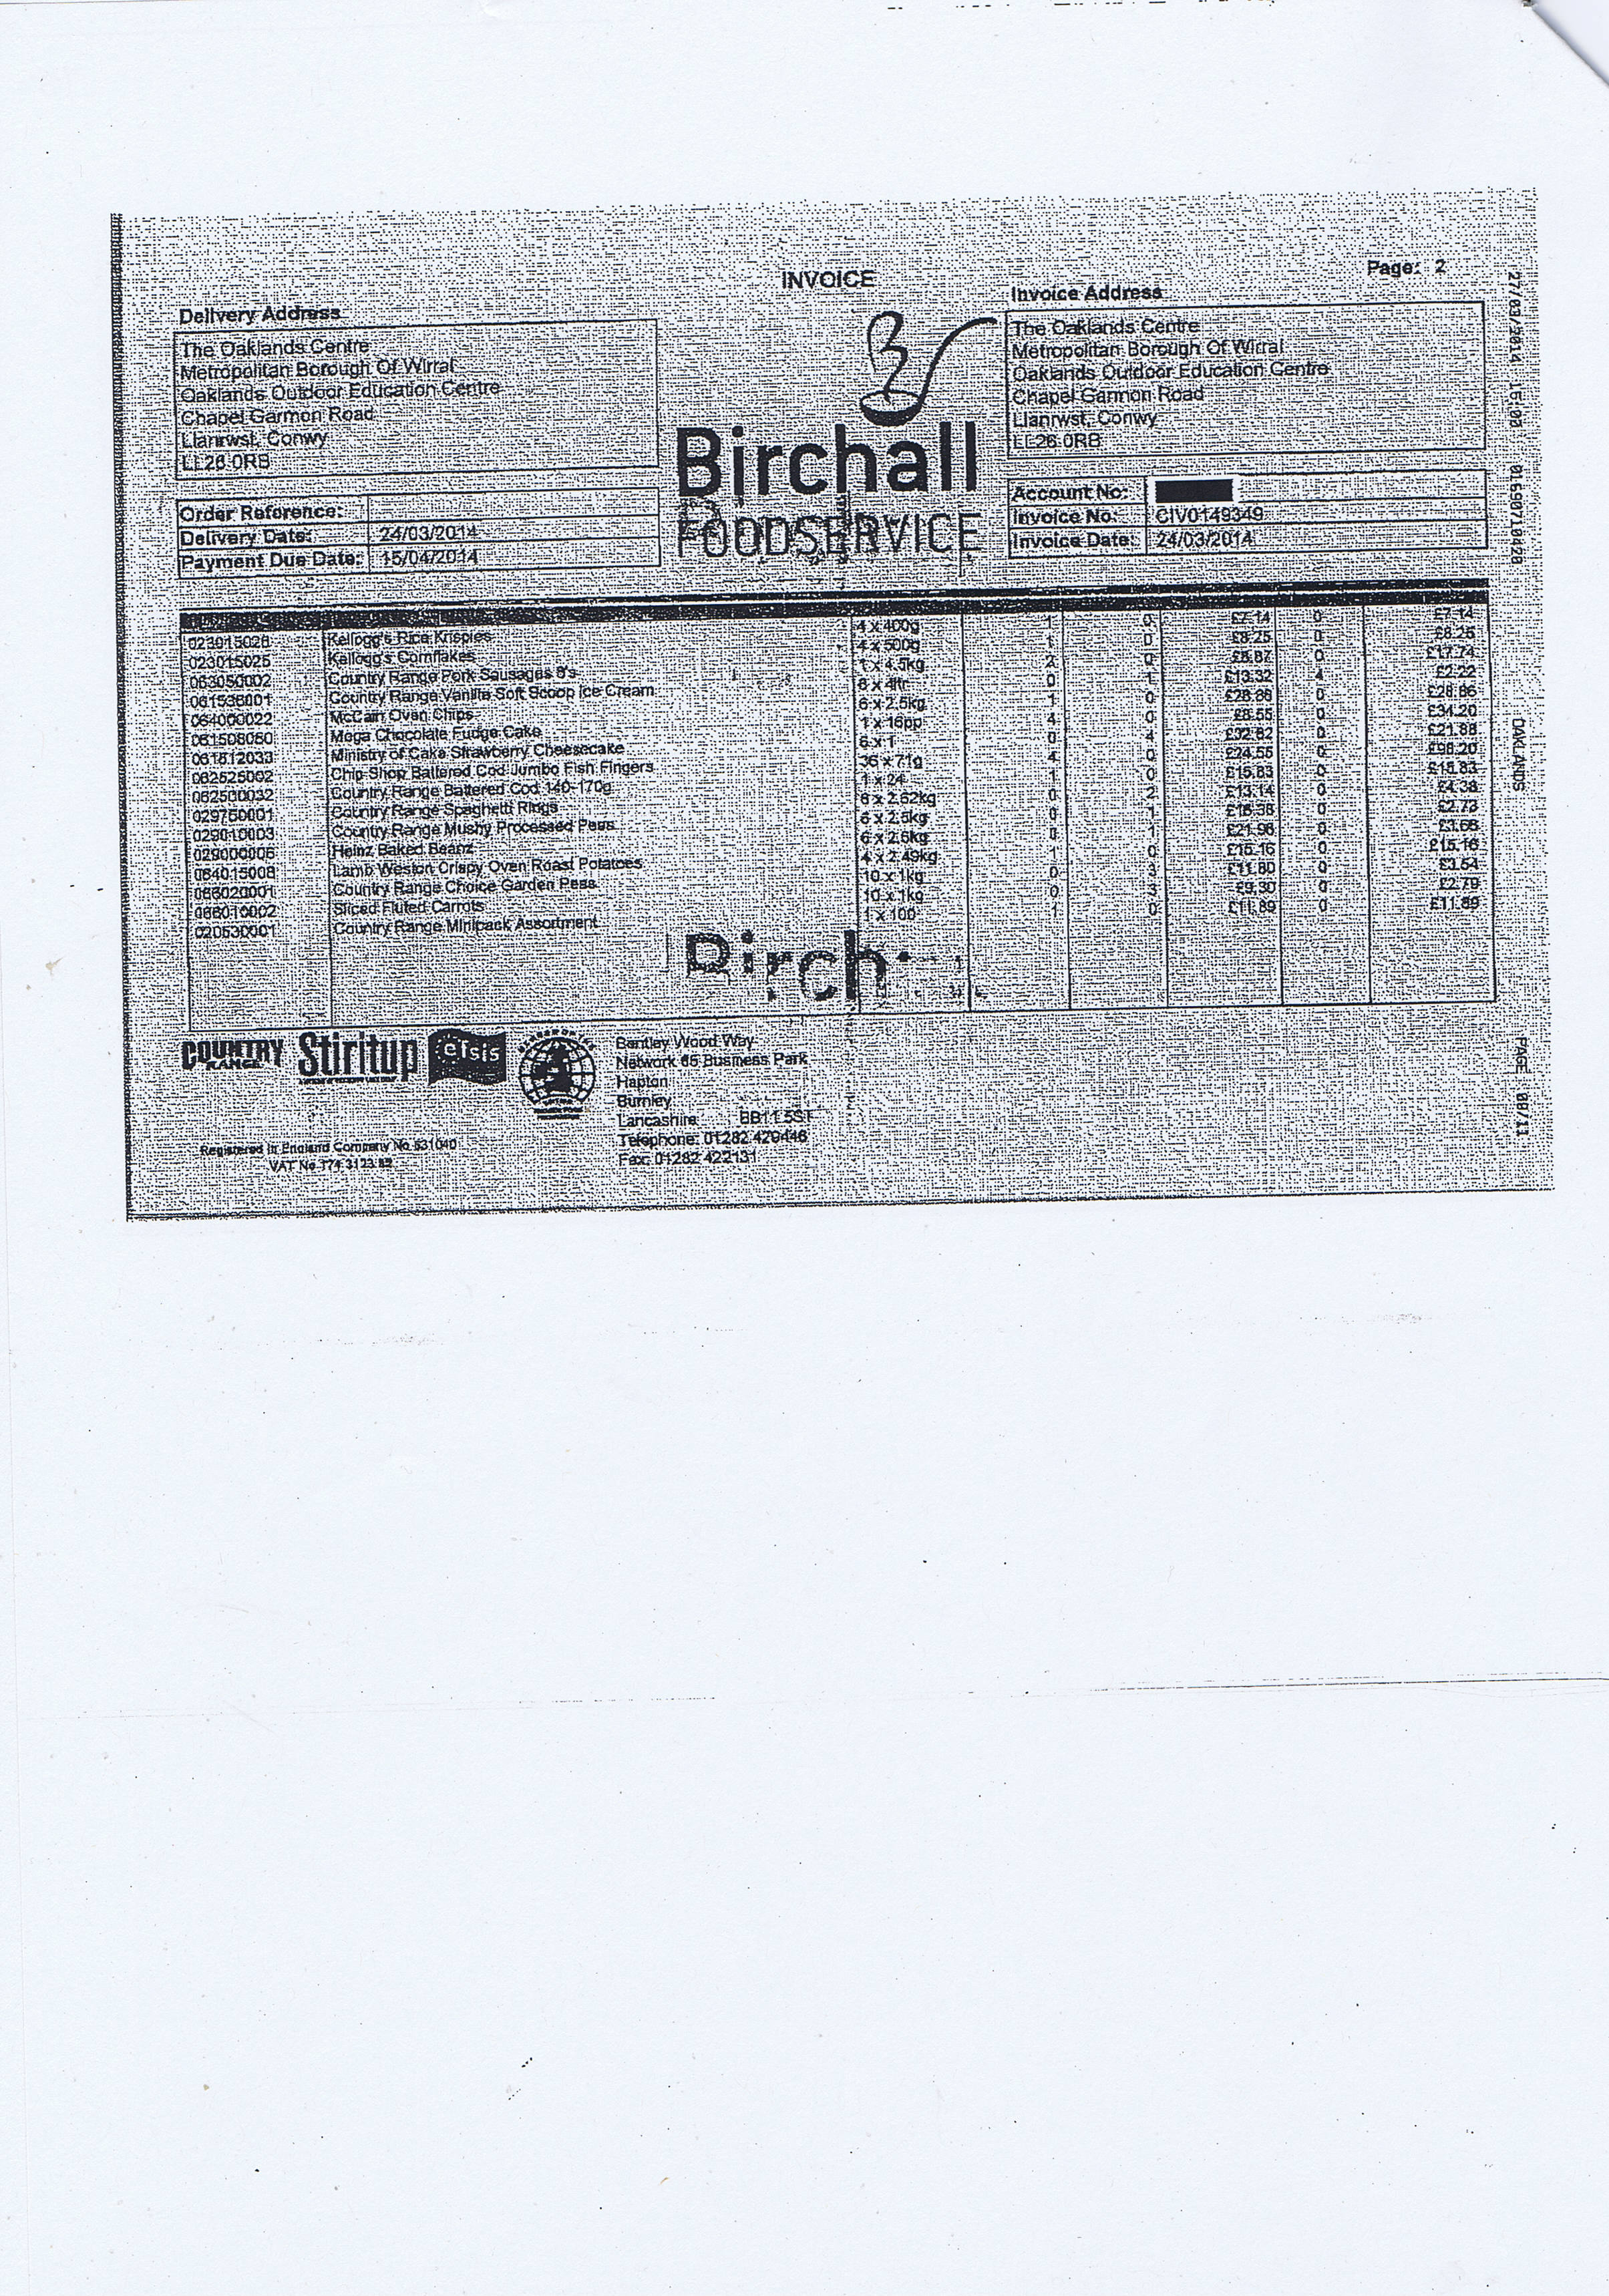 Wirral Council invoice 75 Birchall Foodservice £568.94 page 2 of 3